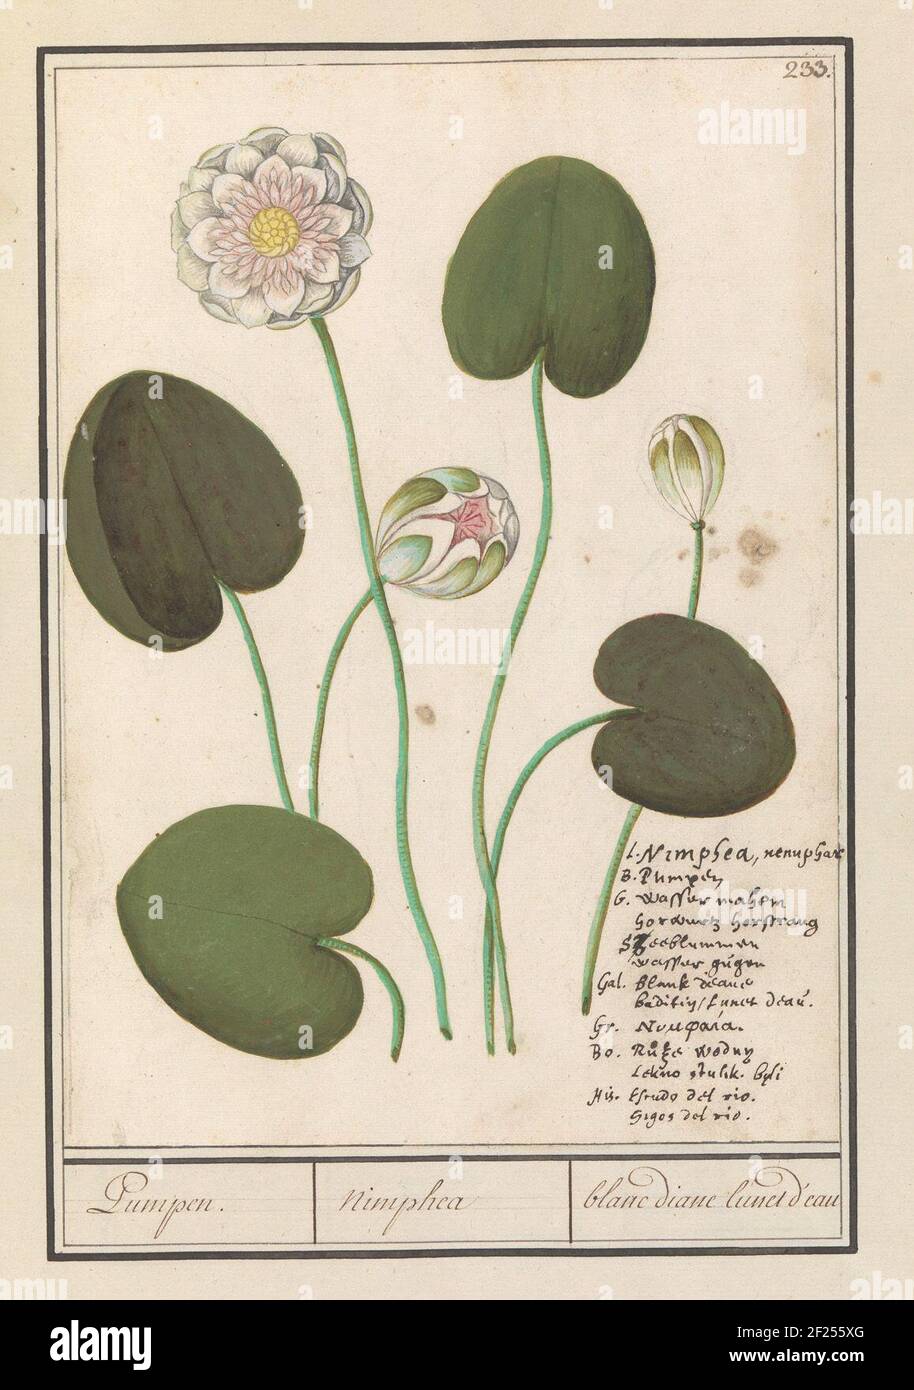 White water lily (Nymphaea alba); Pumping. / Nimphea / Blanc Diane Lunet d'eau.waterlelie, probably the white water lily. Numbered at the top right: 233. At the bottom right The name in seven languages. Part of the third album with drawings of flowers and plants. Tenth of twelve albums with drawings of animals, birds and plants known around 1600, made by Emperor Rudolf II. With explanation in Dutch, Latin and French. Stock Photo